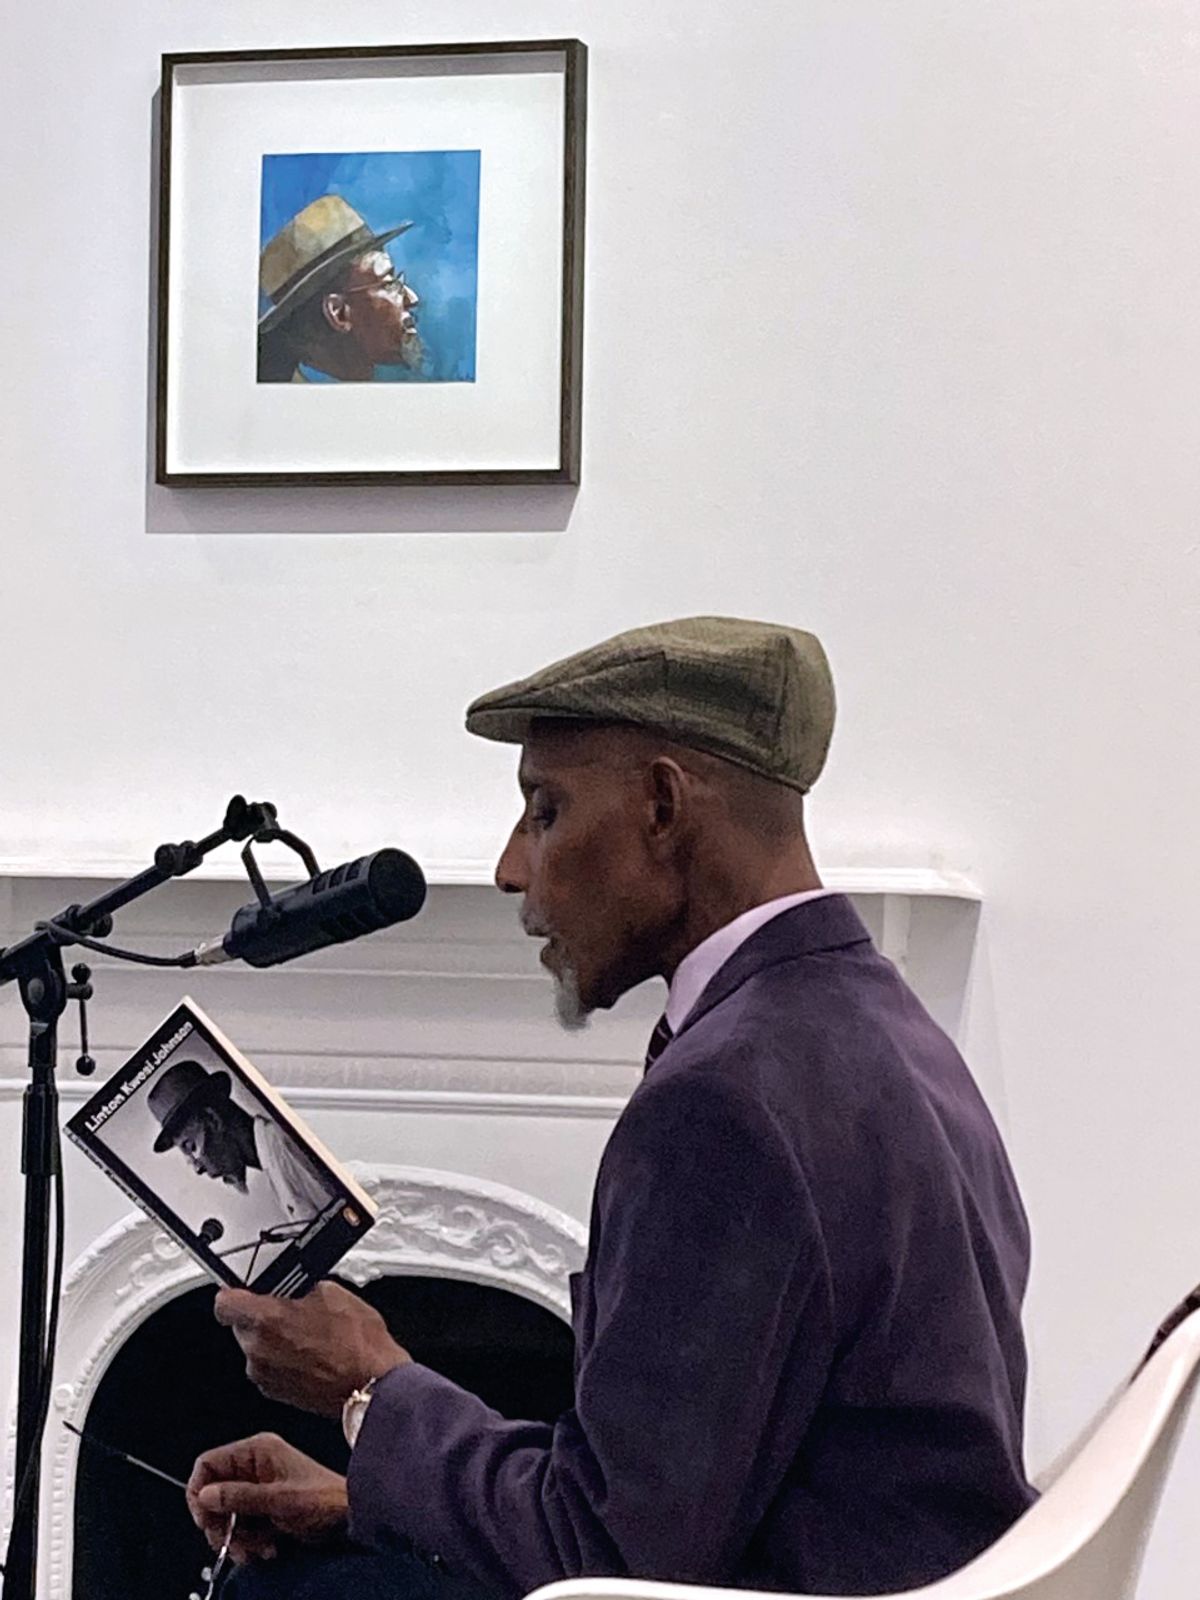 Kwesi Johnson reads one of his poems in front of Peter Blake’s portrait of him at Paul Stolper gallery in London

Photo: Sarah Hardacre